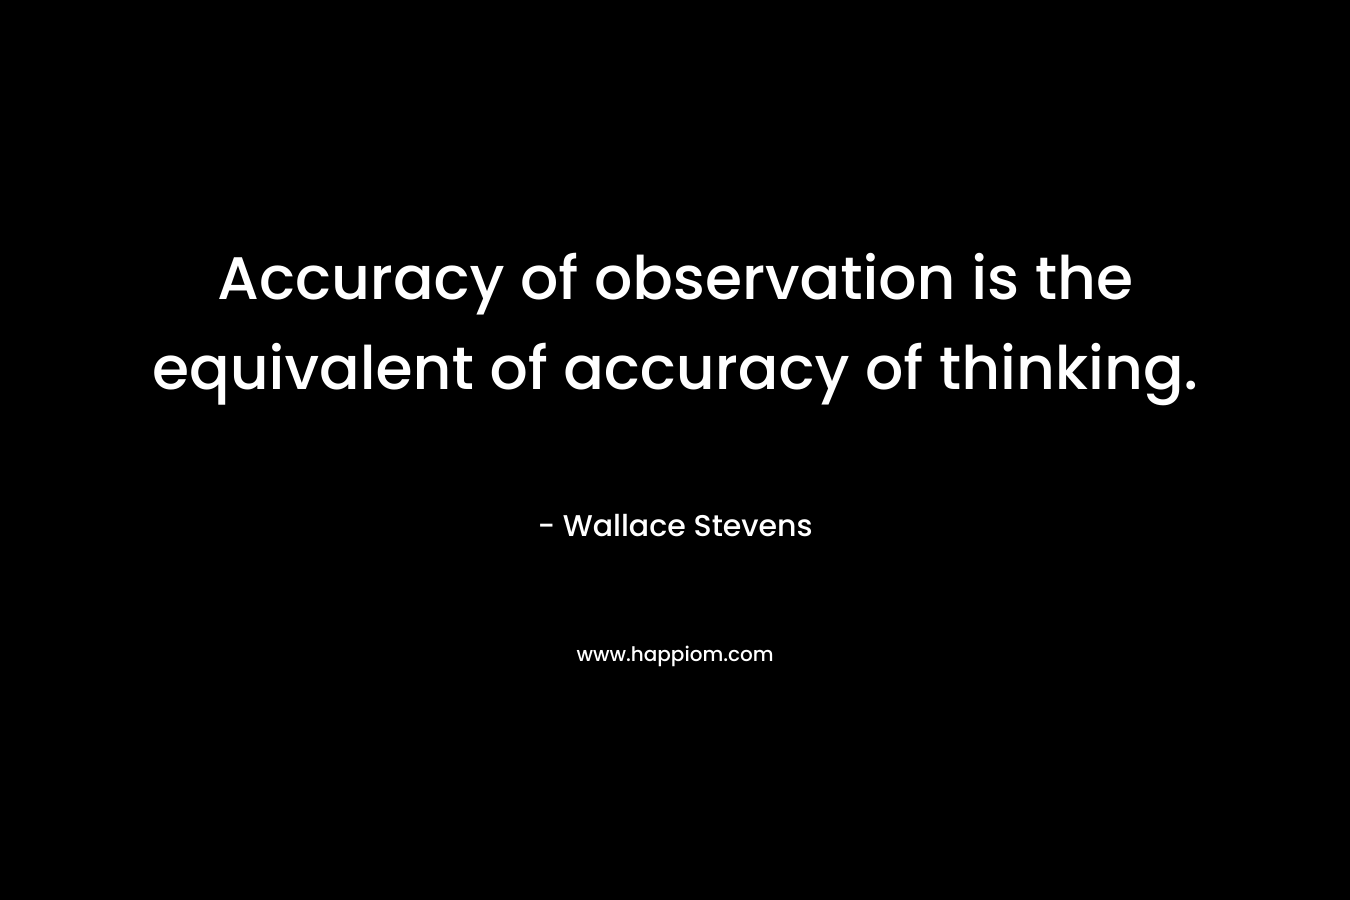 Accuracy of observation is the equivalent of accuracy of thinking. – Wallace Stevens